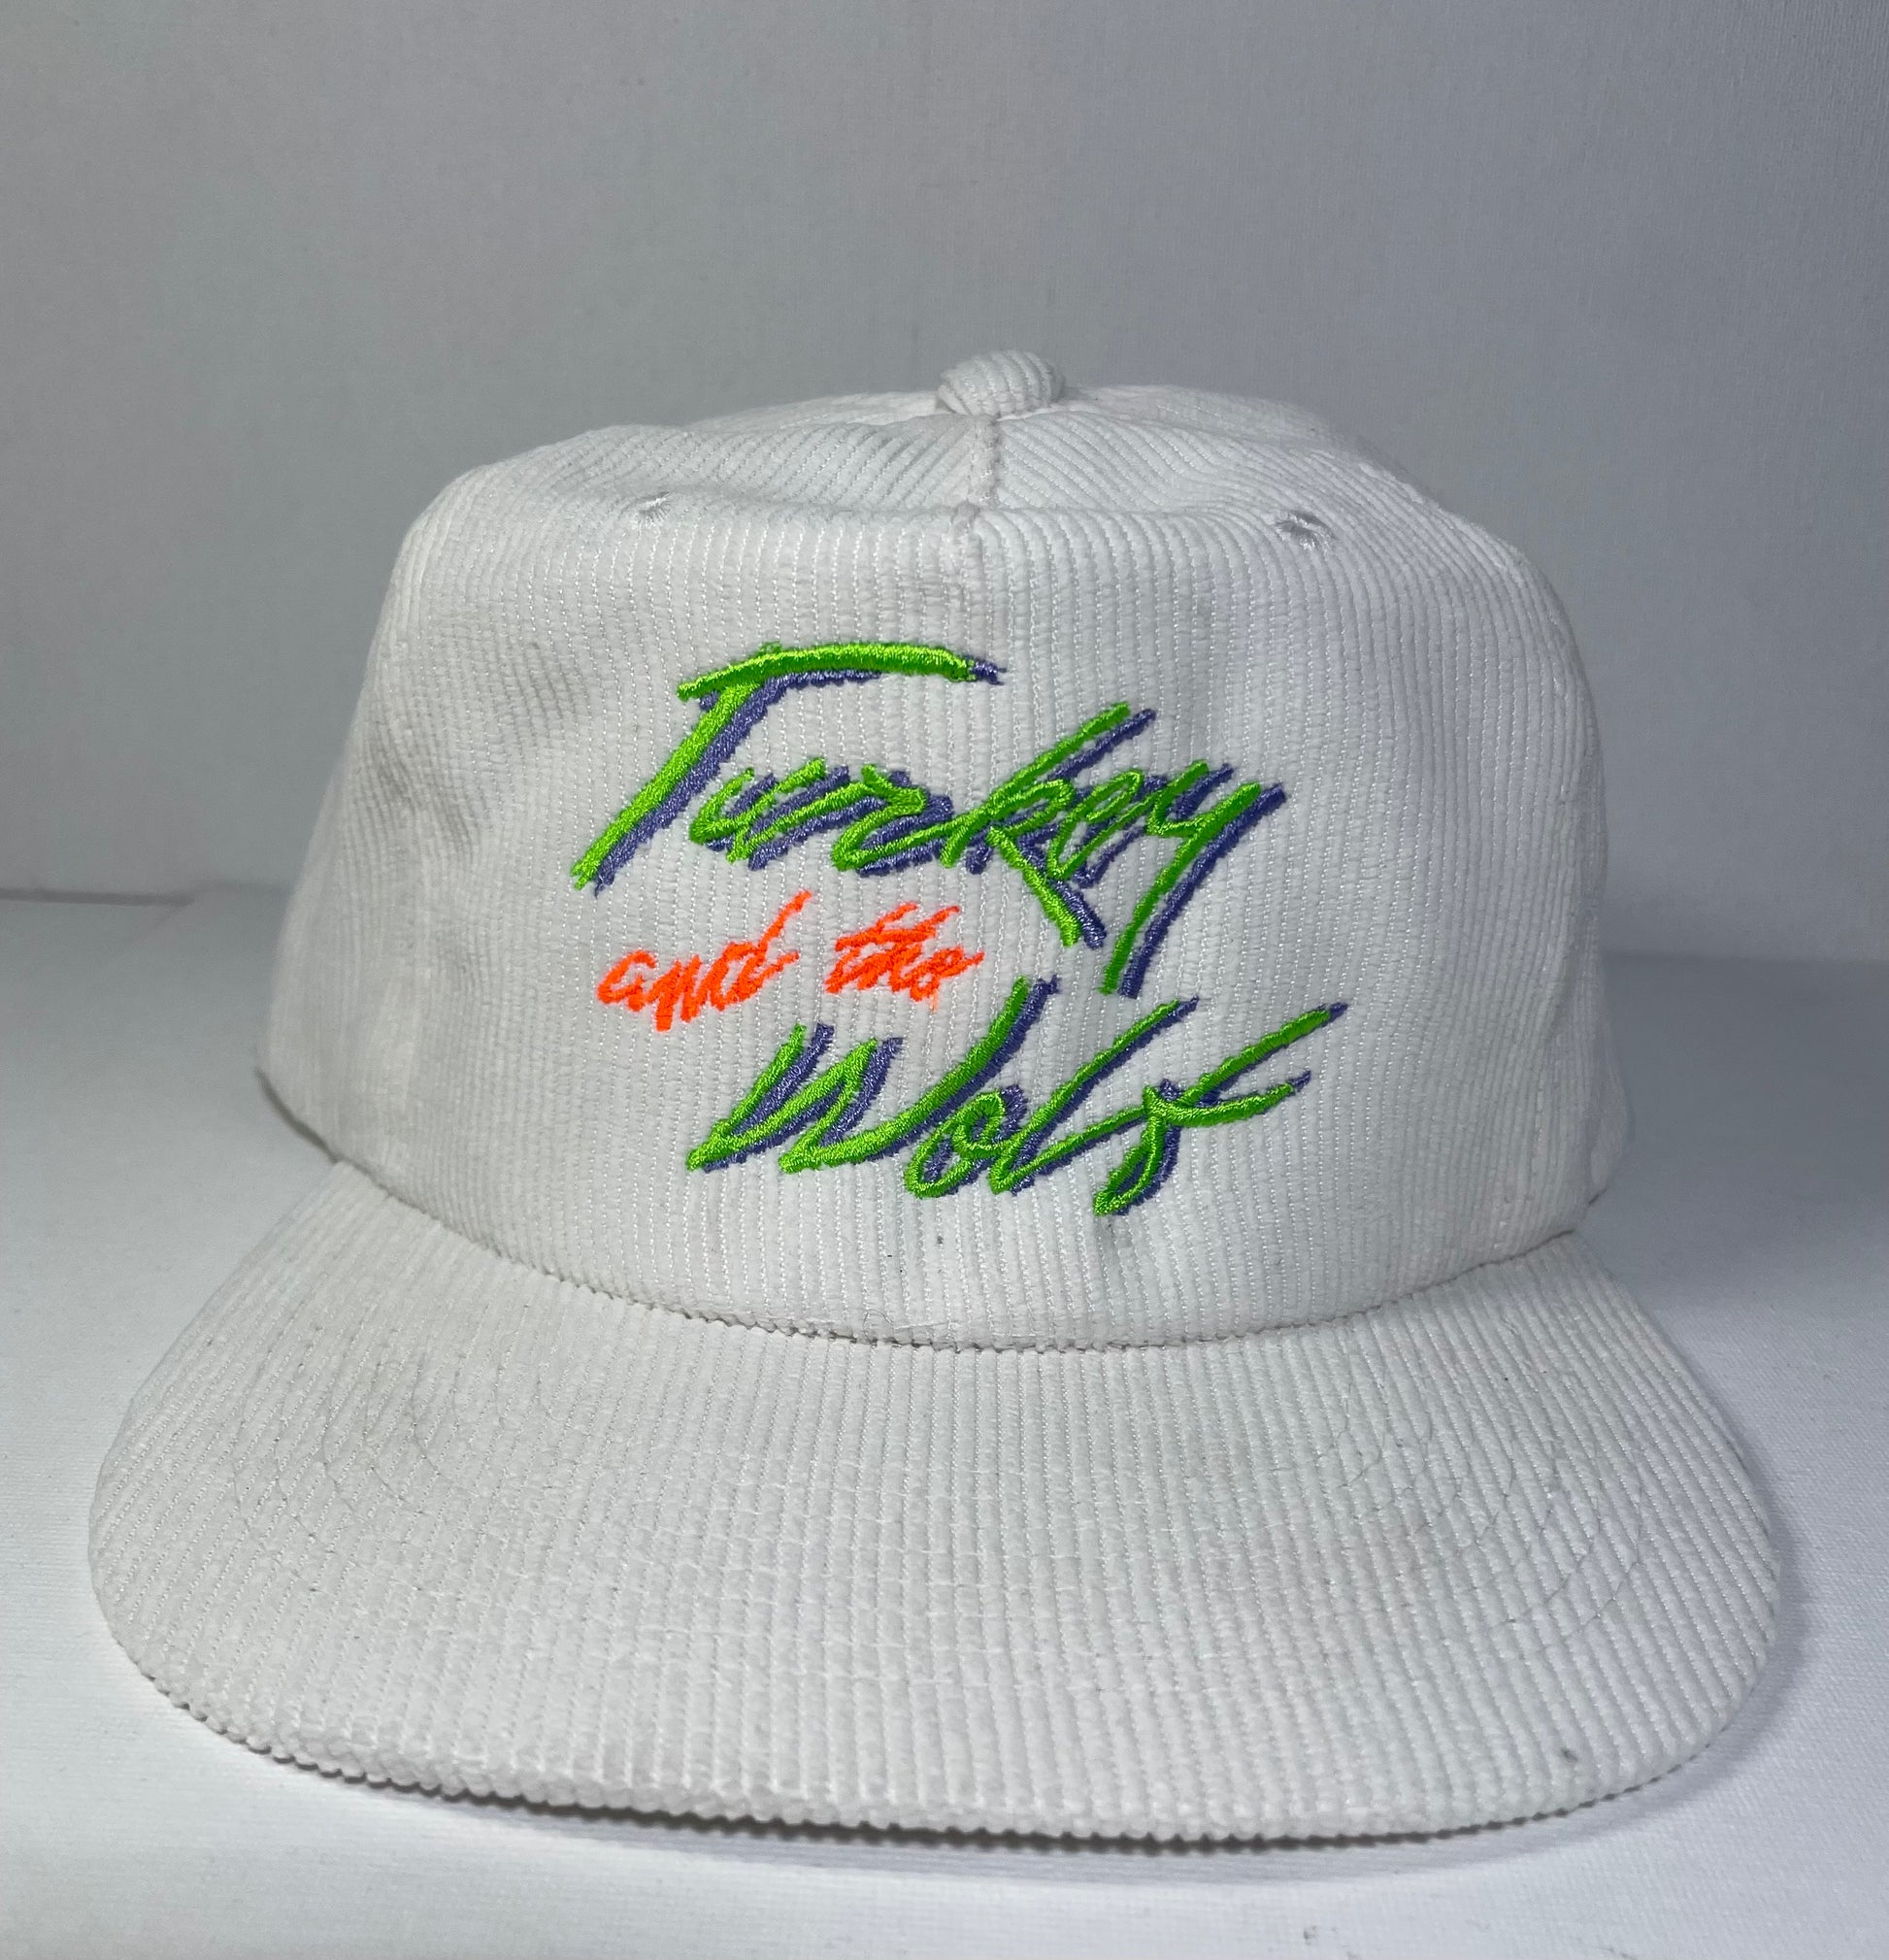 White corduroy hat that says turkey and the wolf in green and blue text